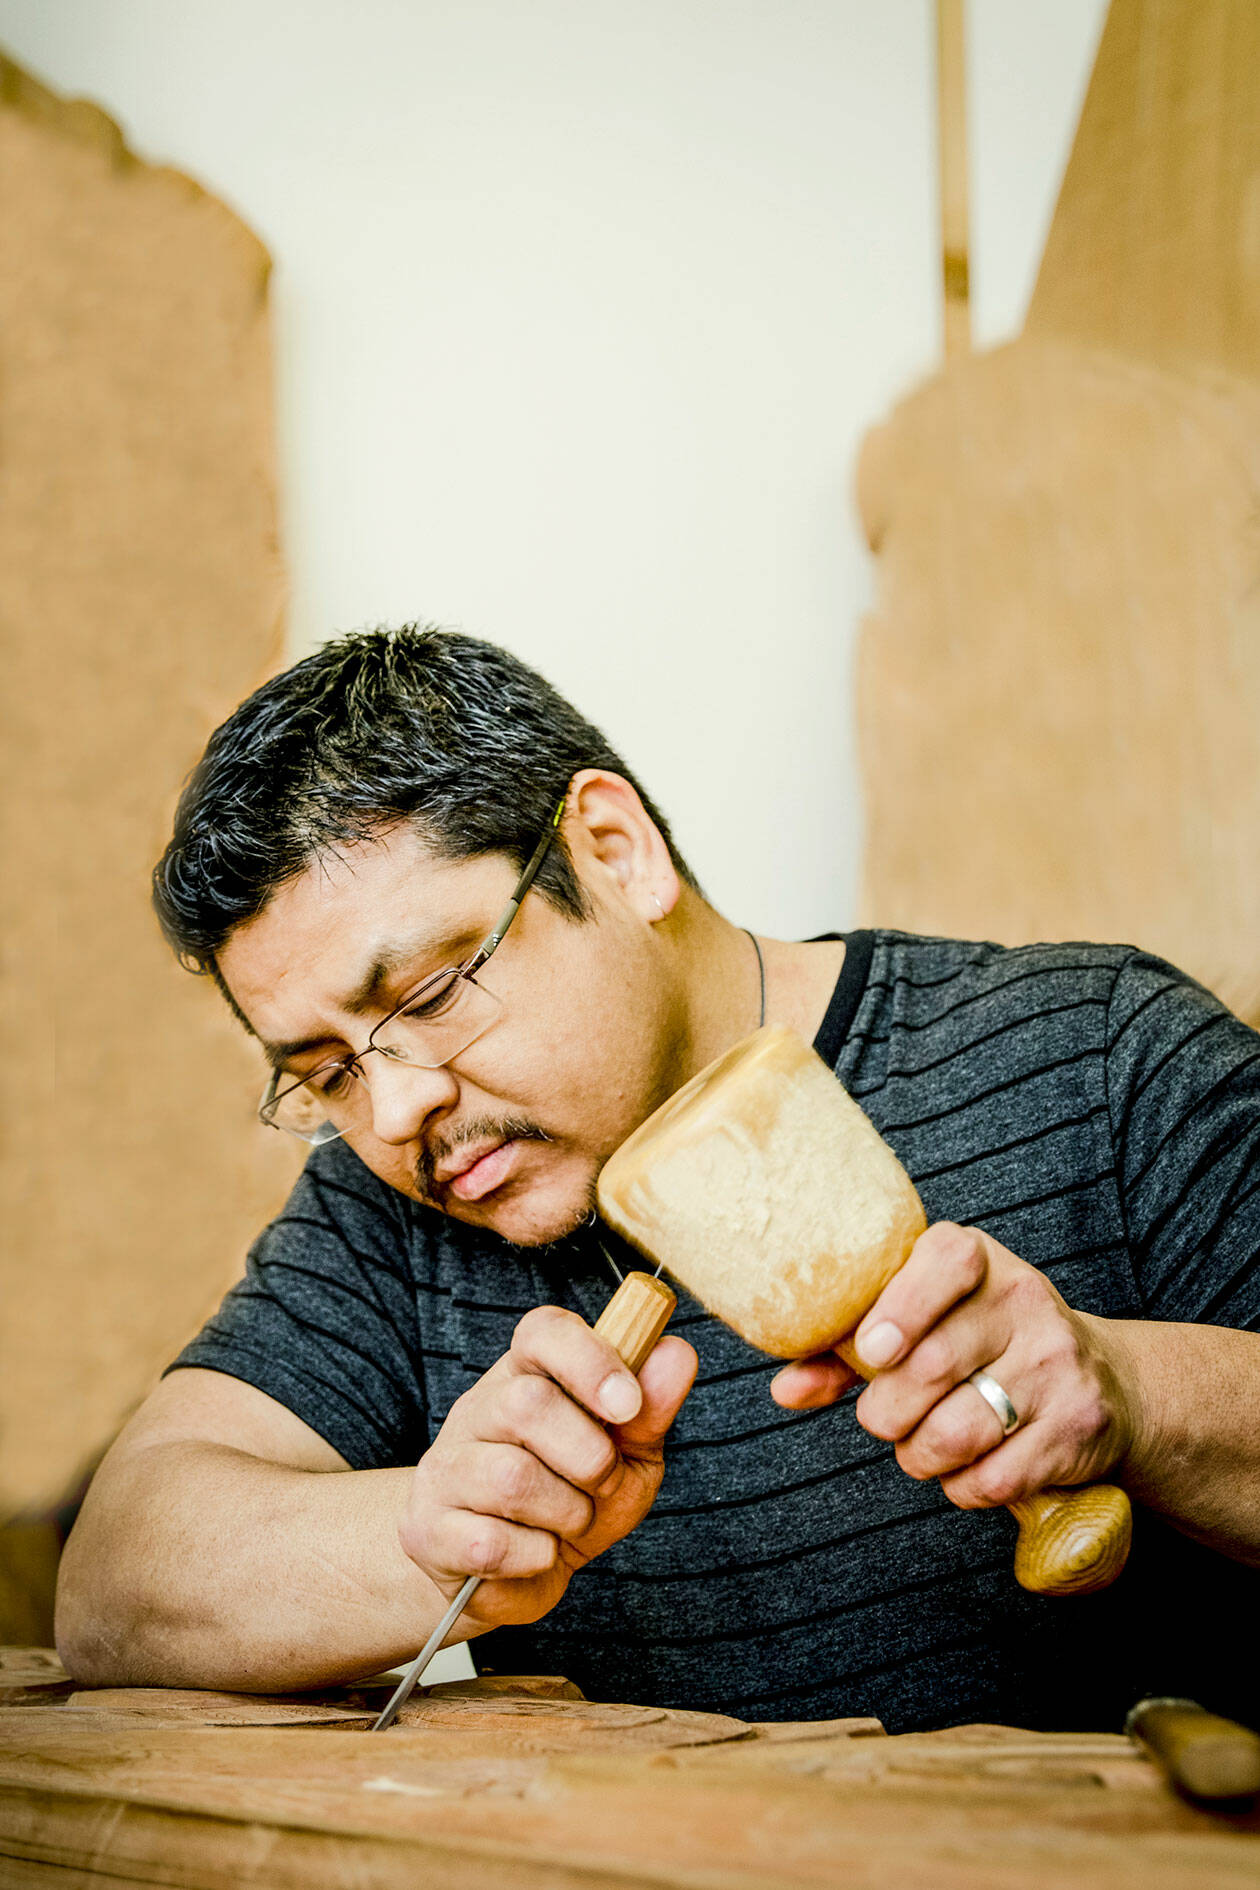 Alex “Swiftwater” McCarty, a Makah artist who will present a lecture, about the Ozette Village, is pictured working on a carving. (Shauna Bittle)